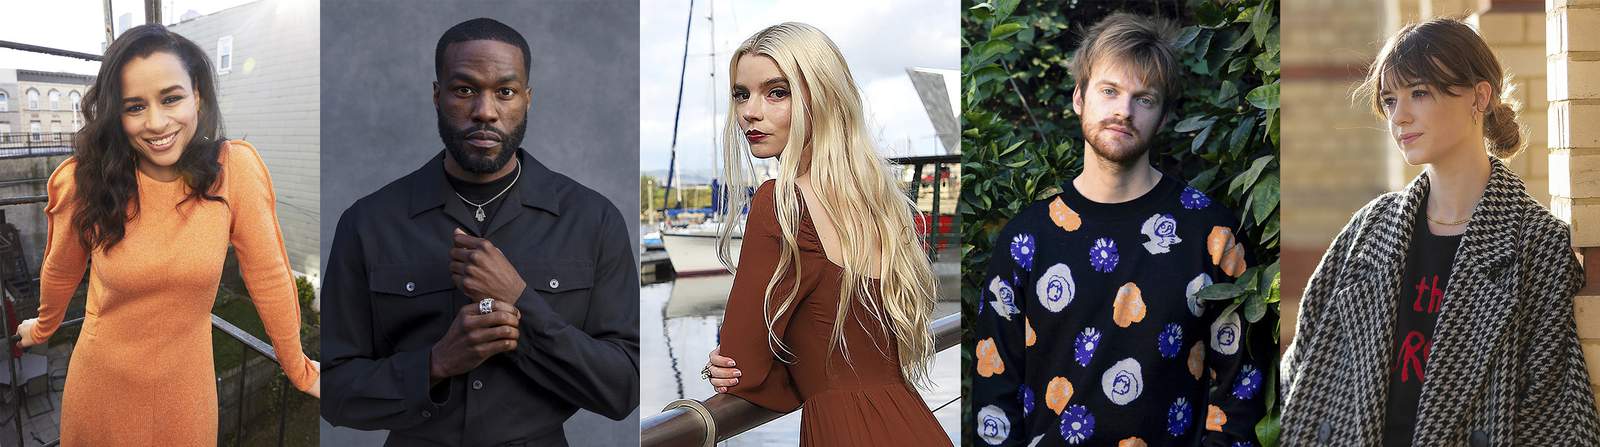 The AP names its Breakthrough Entertainers of 2020